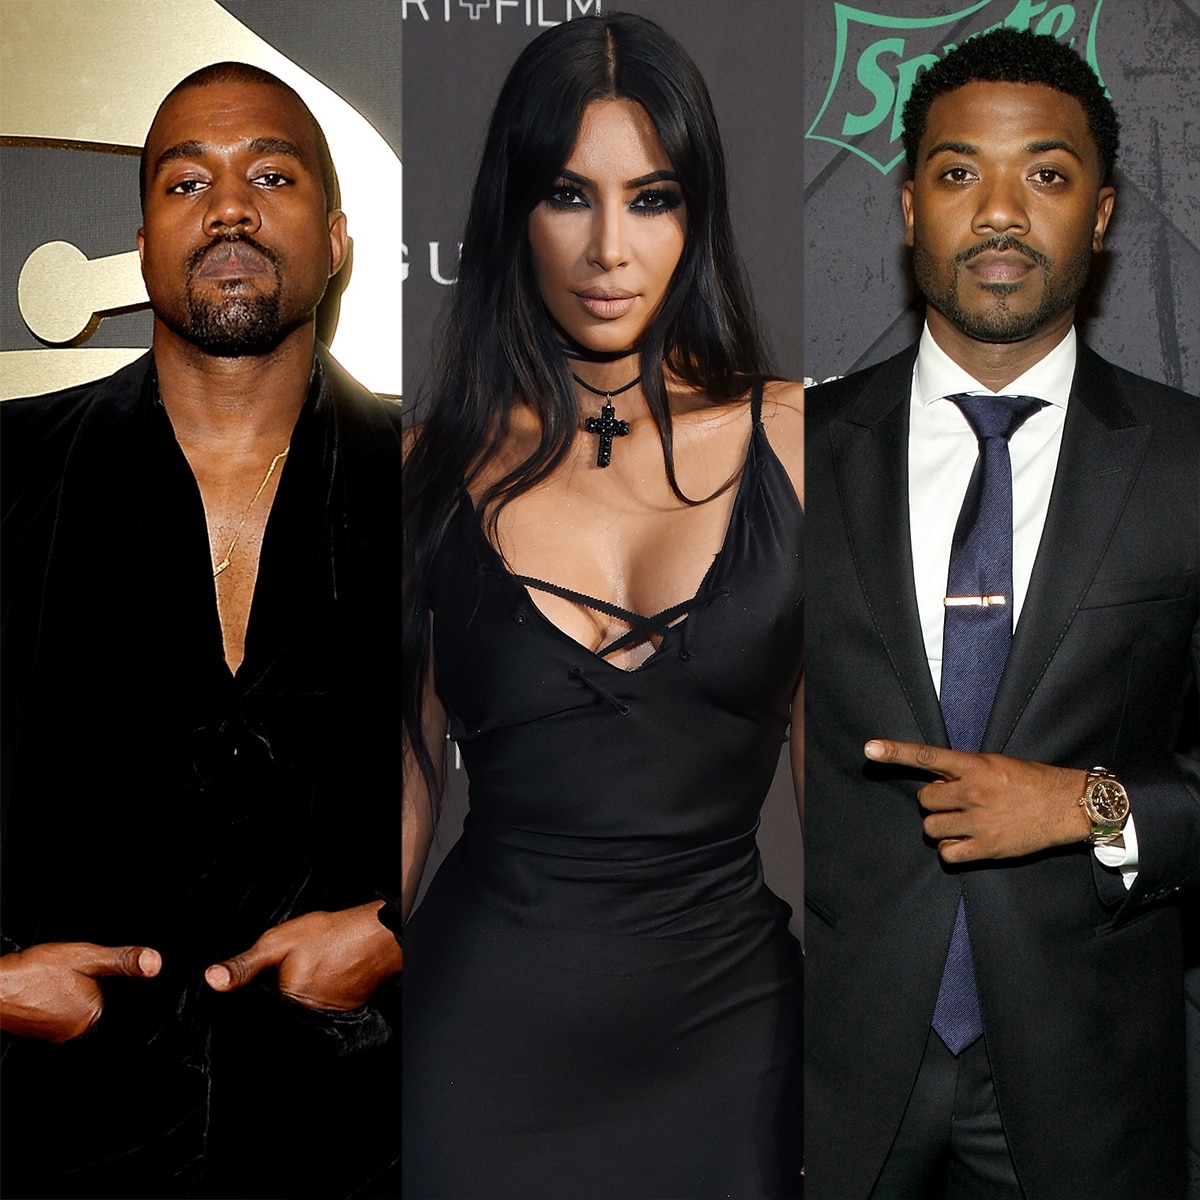 dave patience recommends kim kardashian and ray j video pic